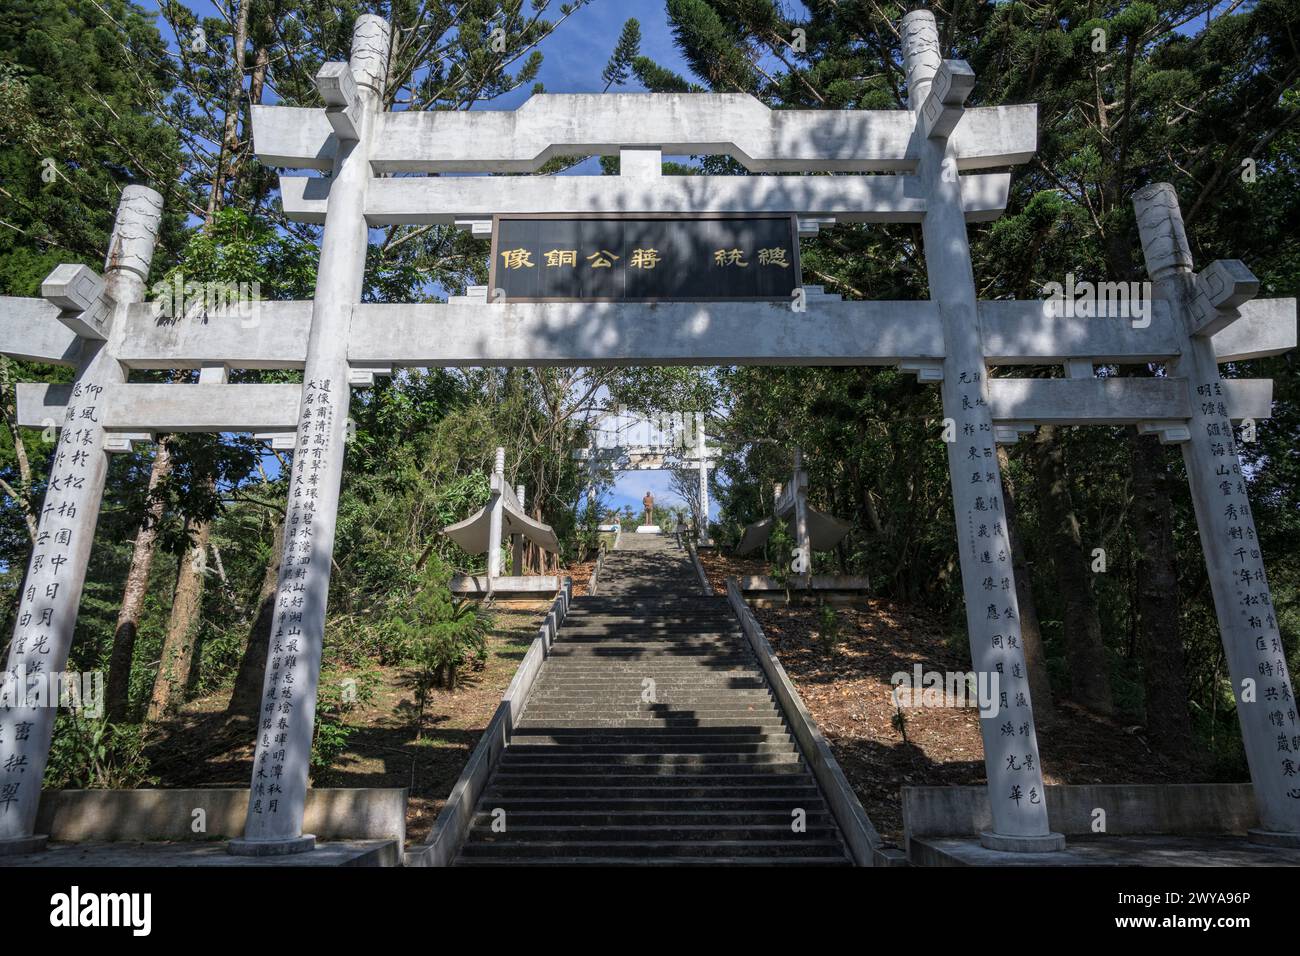 An oriental Torii gate with Kanji text, leading to a sacred area surrounded by lush greenery and clear blue skies close to Sun Moon lake Stock Photo